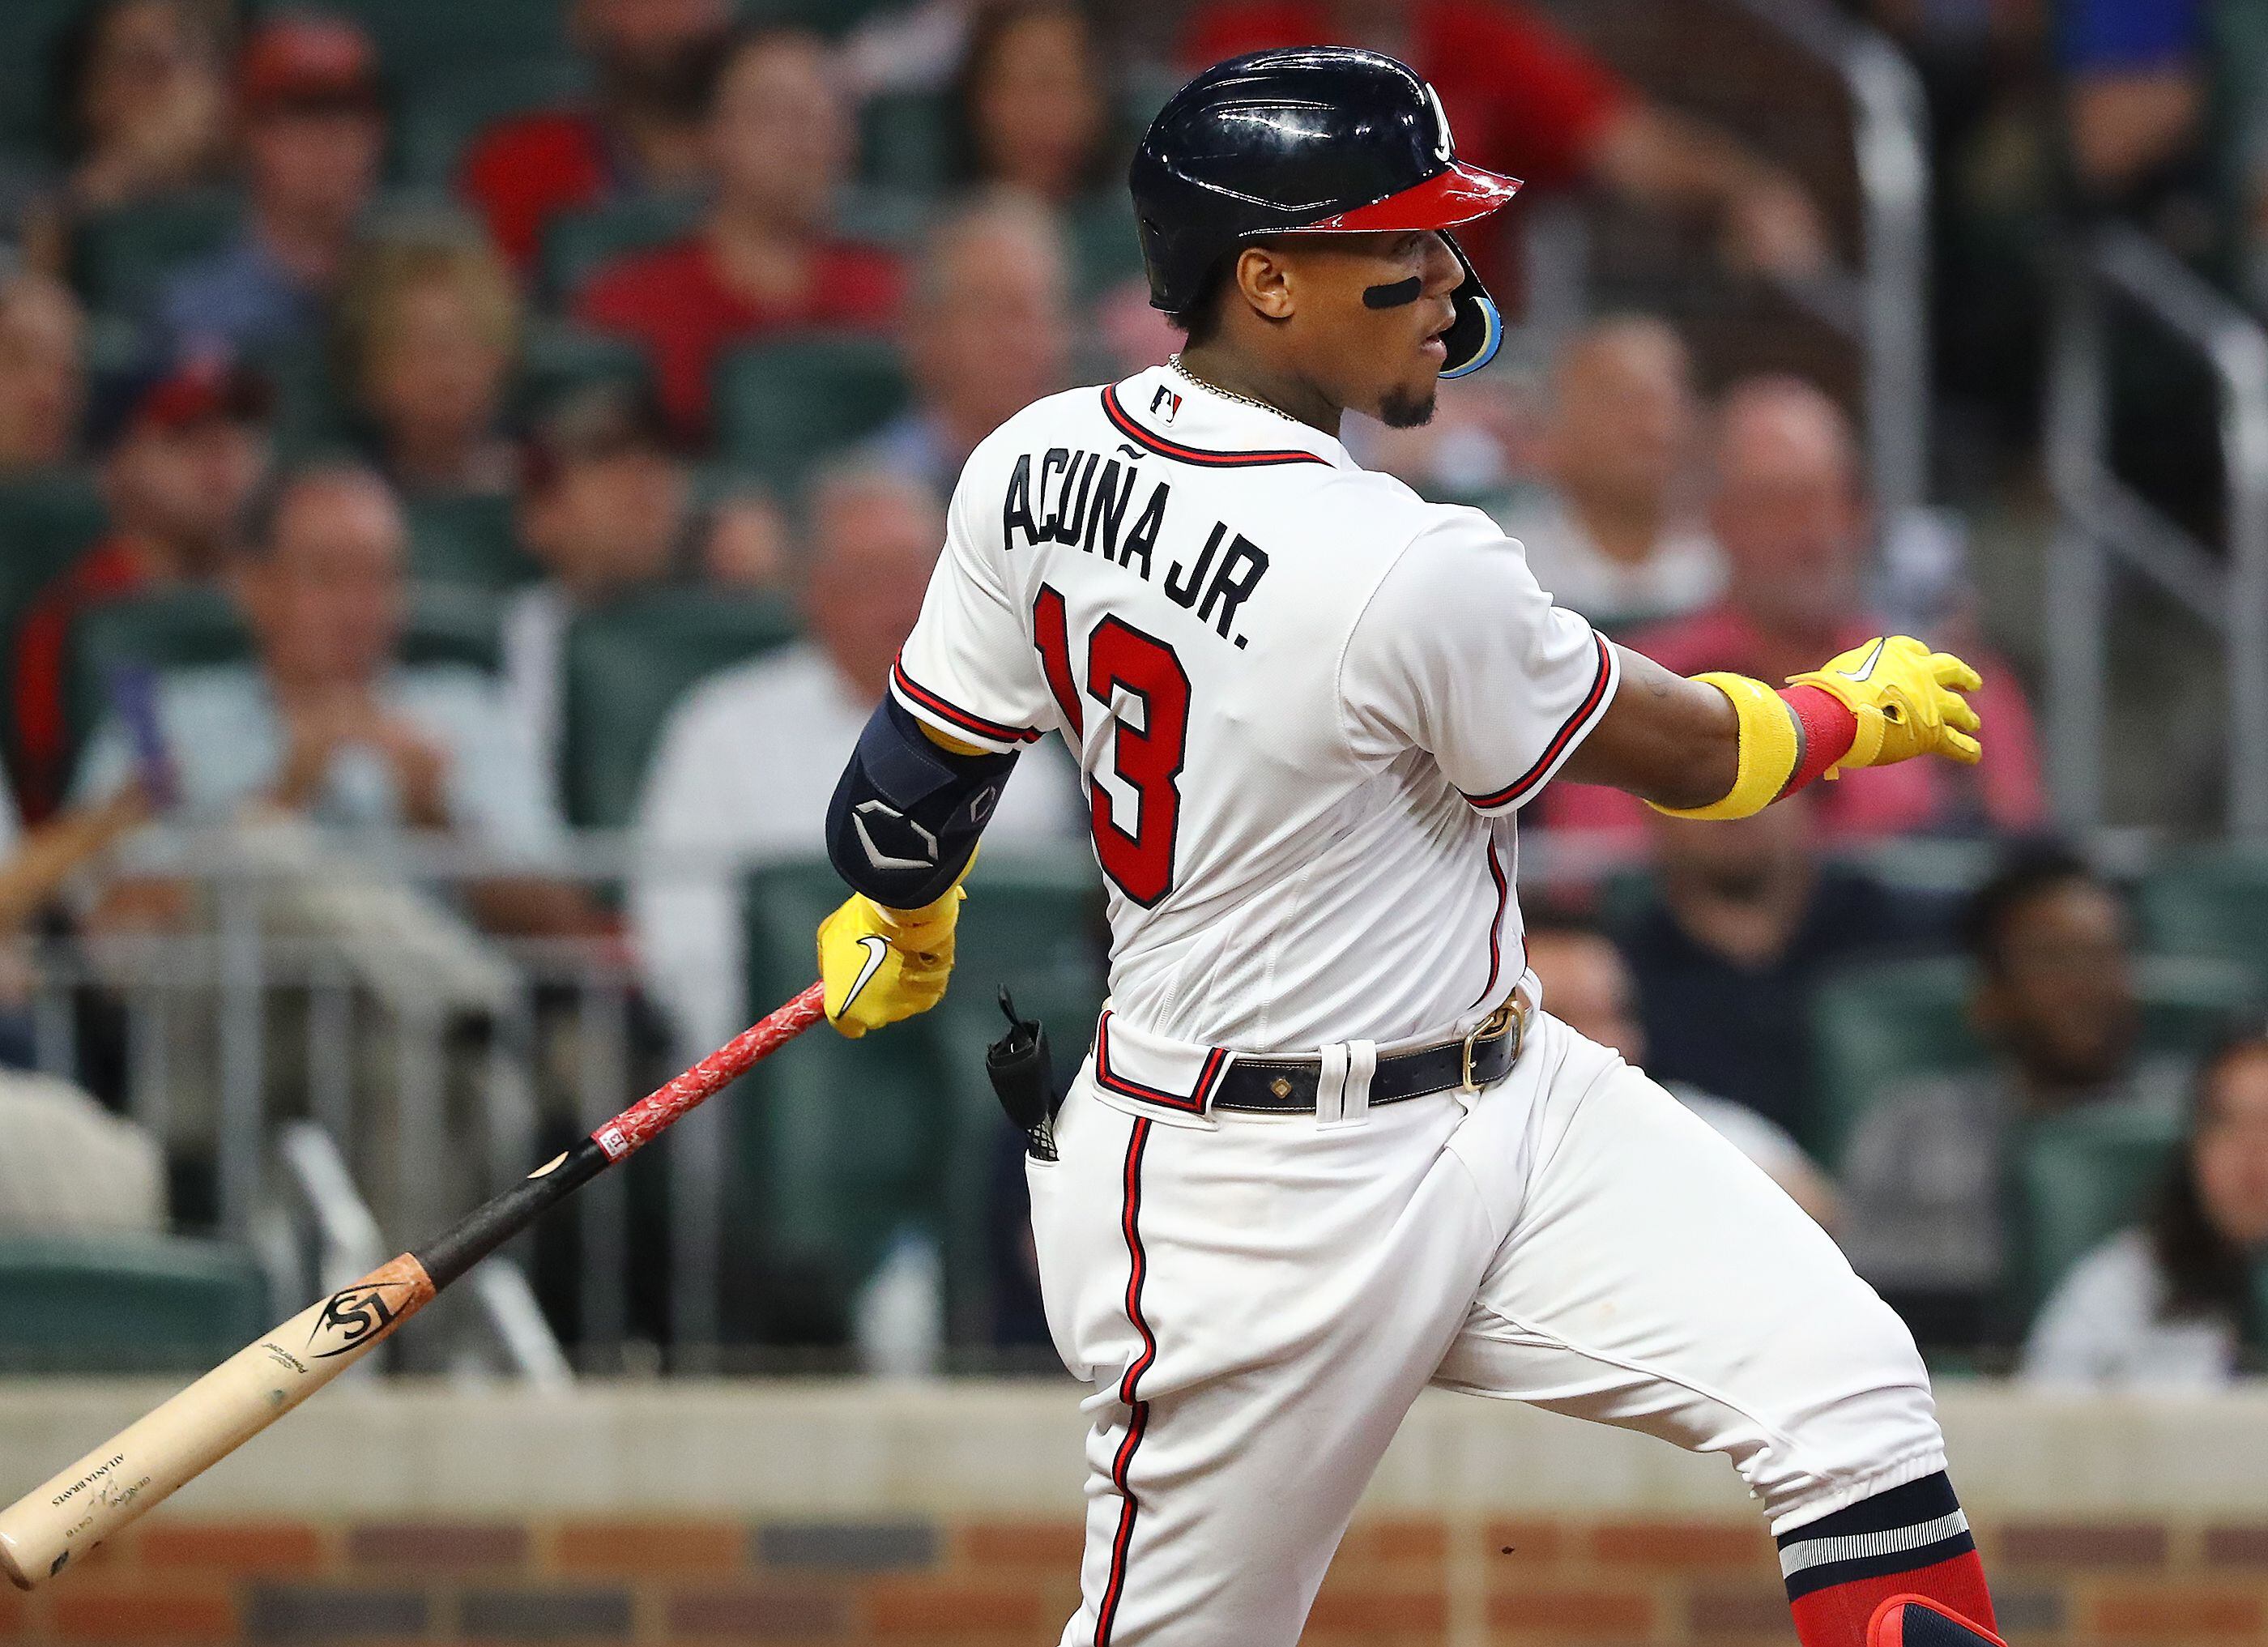 Braves outfielder Ronald Acuña Jr. goes from first to third on a walk 